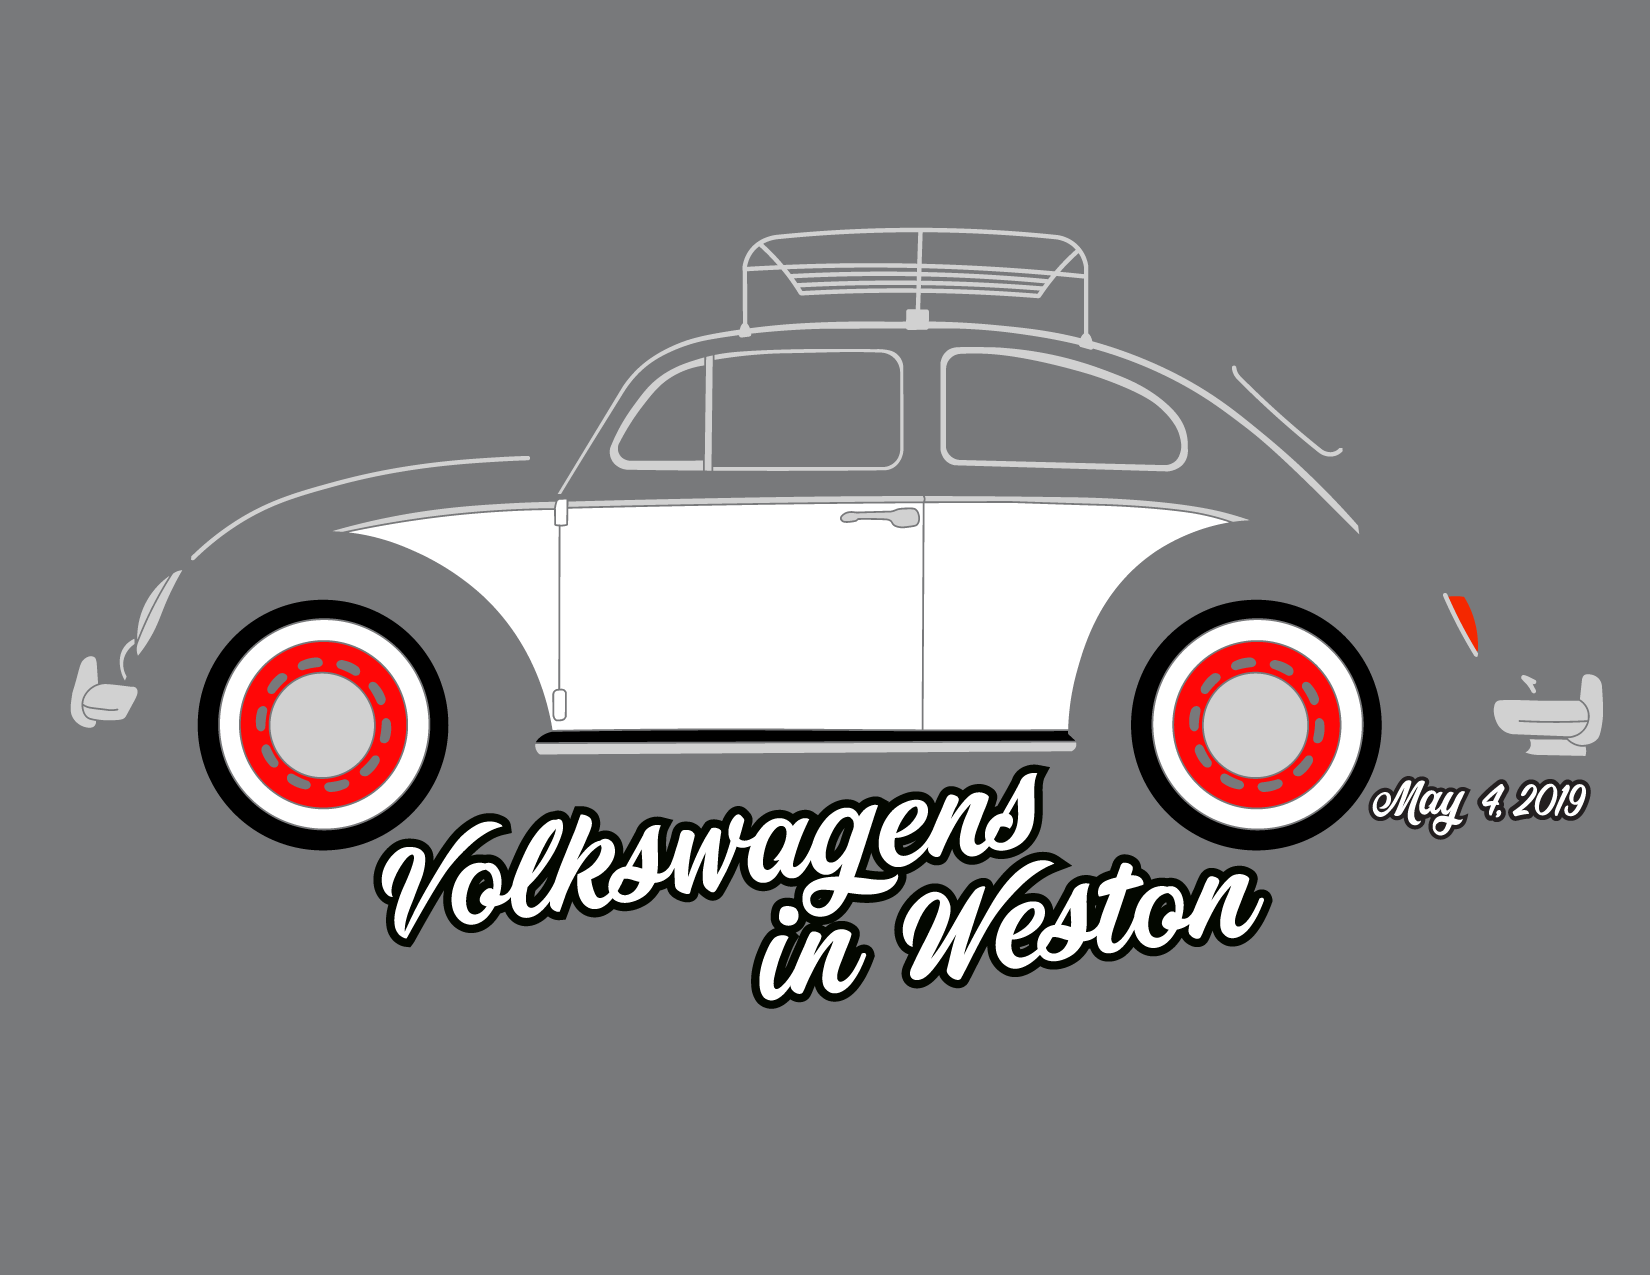 Volkswagens in Weston 2019 Show Multi Color T-Shirt